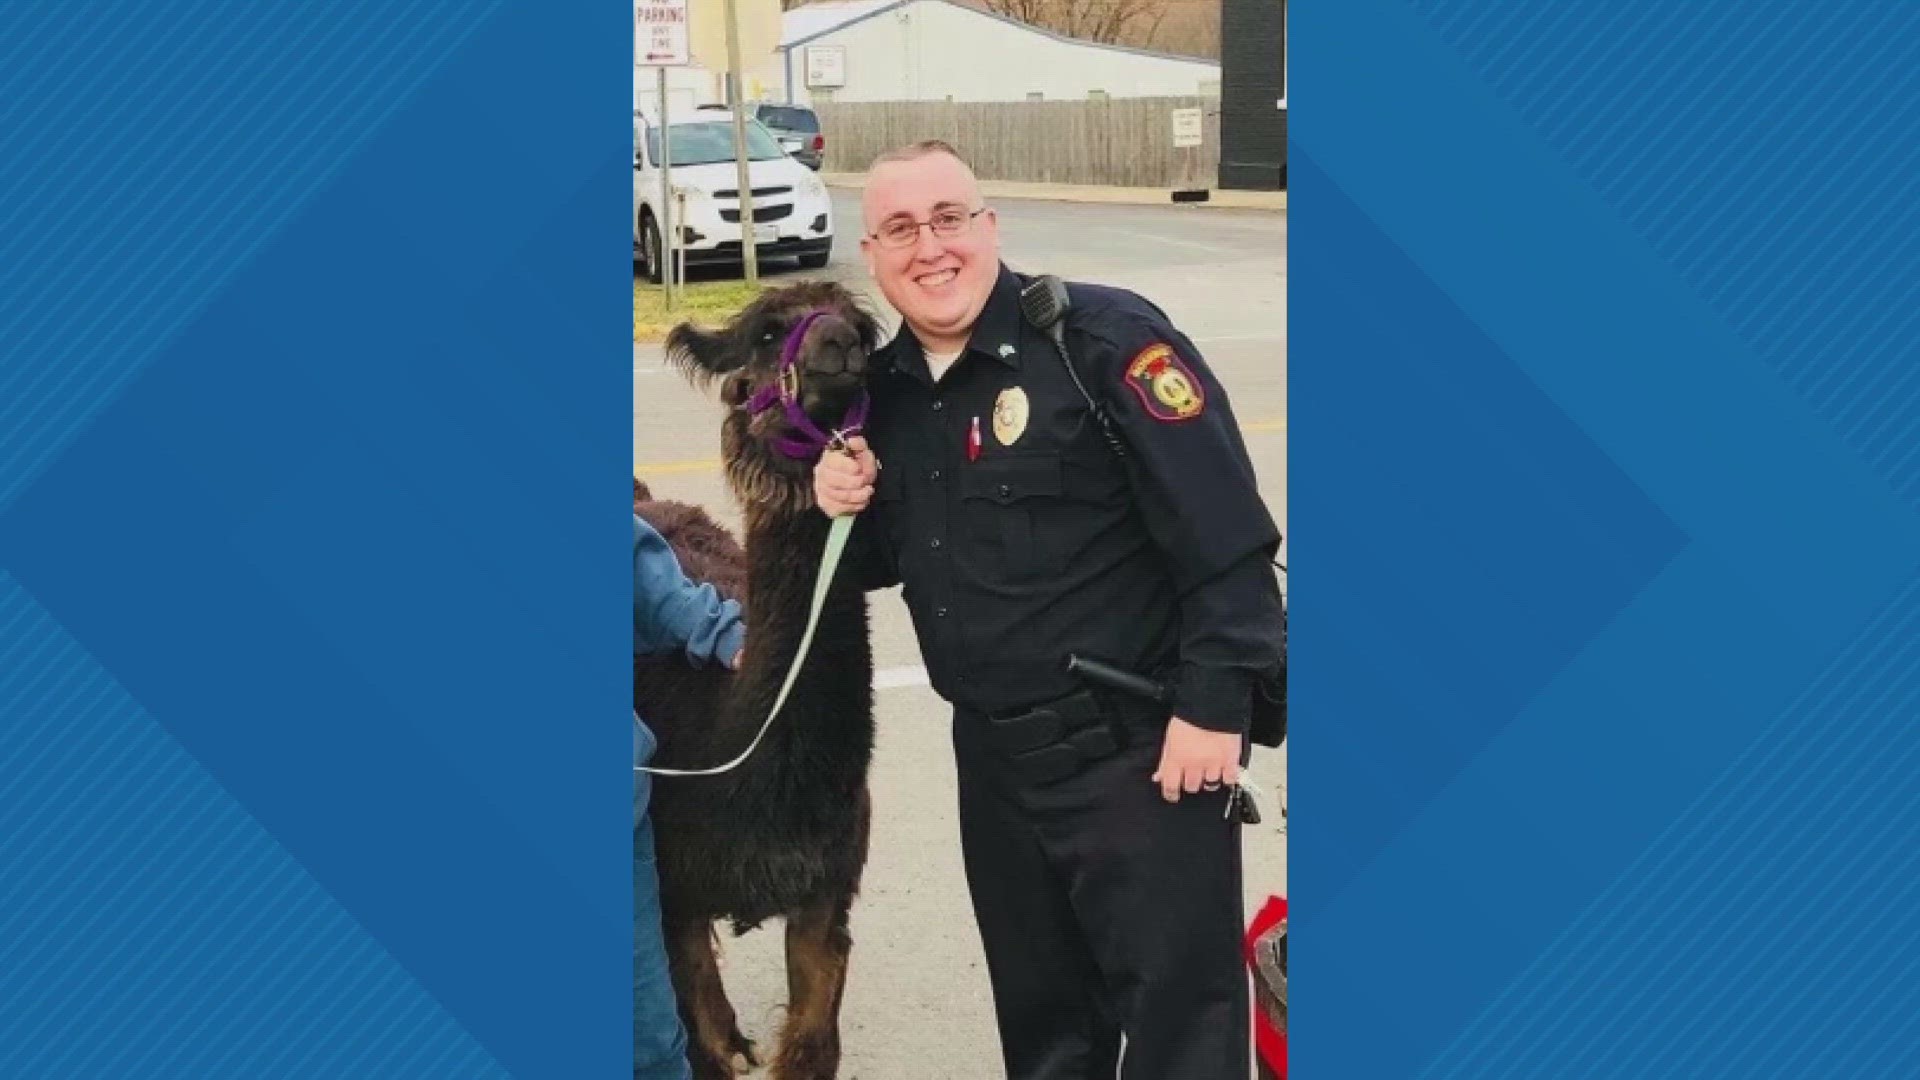 Communities outside of Hermann, Missouri continue to show support for a police officer who was killed on Sunday. The second officer remains in critical condition.